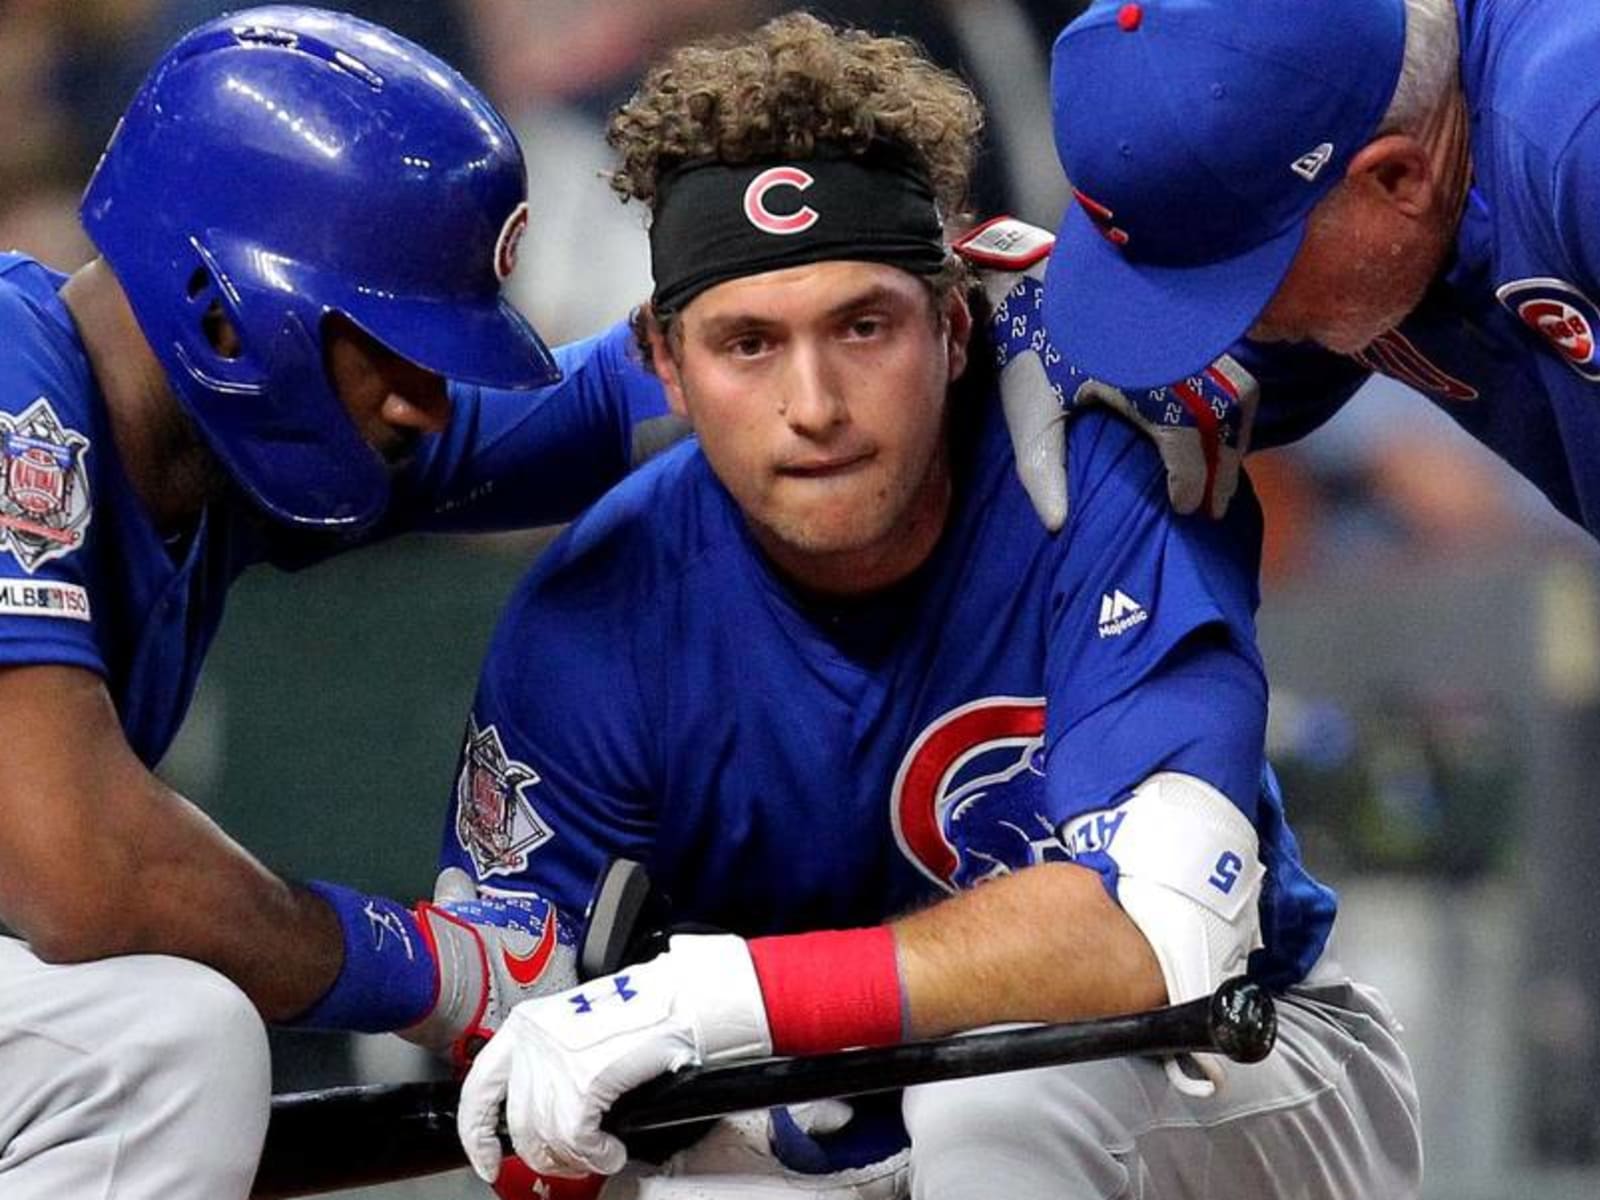 Cubs' Almora on Machado: 'We consider each other family